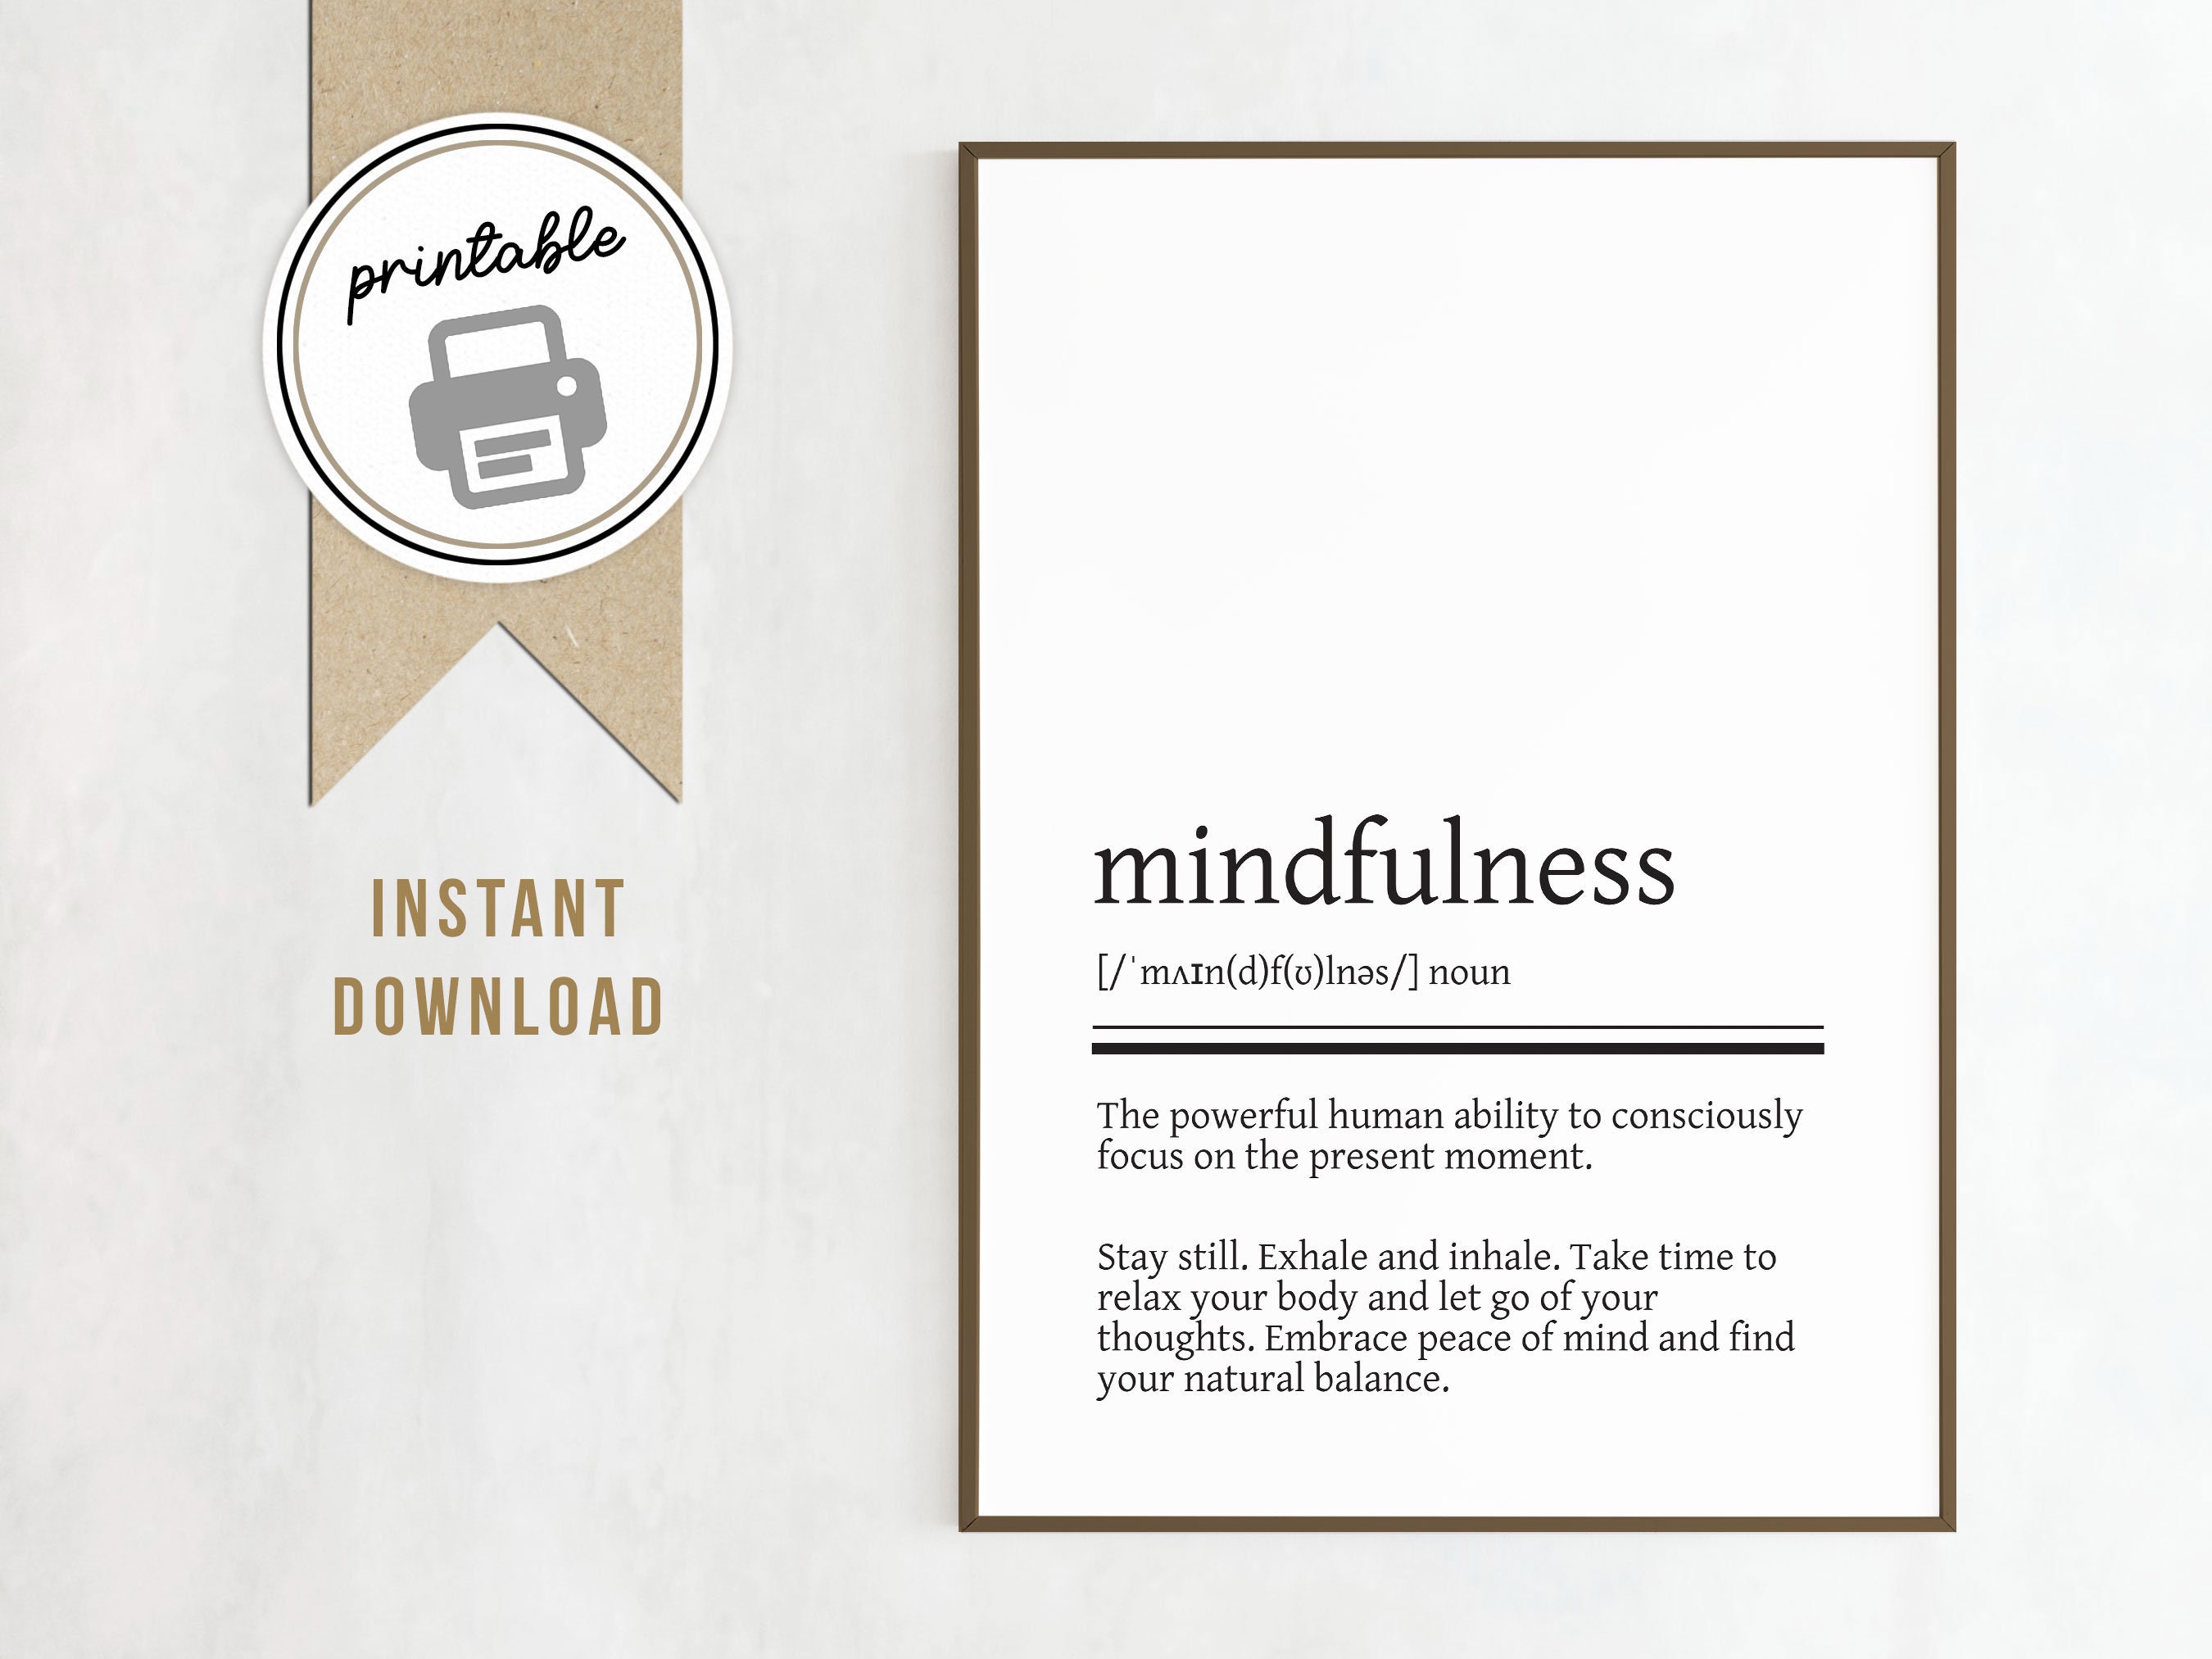 20 Gifts that Encourage Mindfulness and Meaning - Mindful Minutes